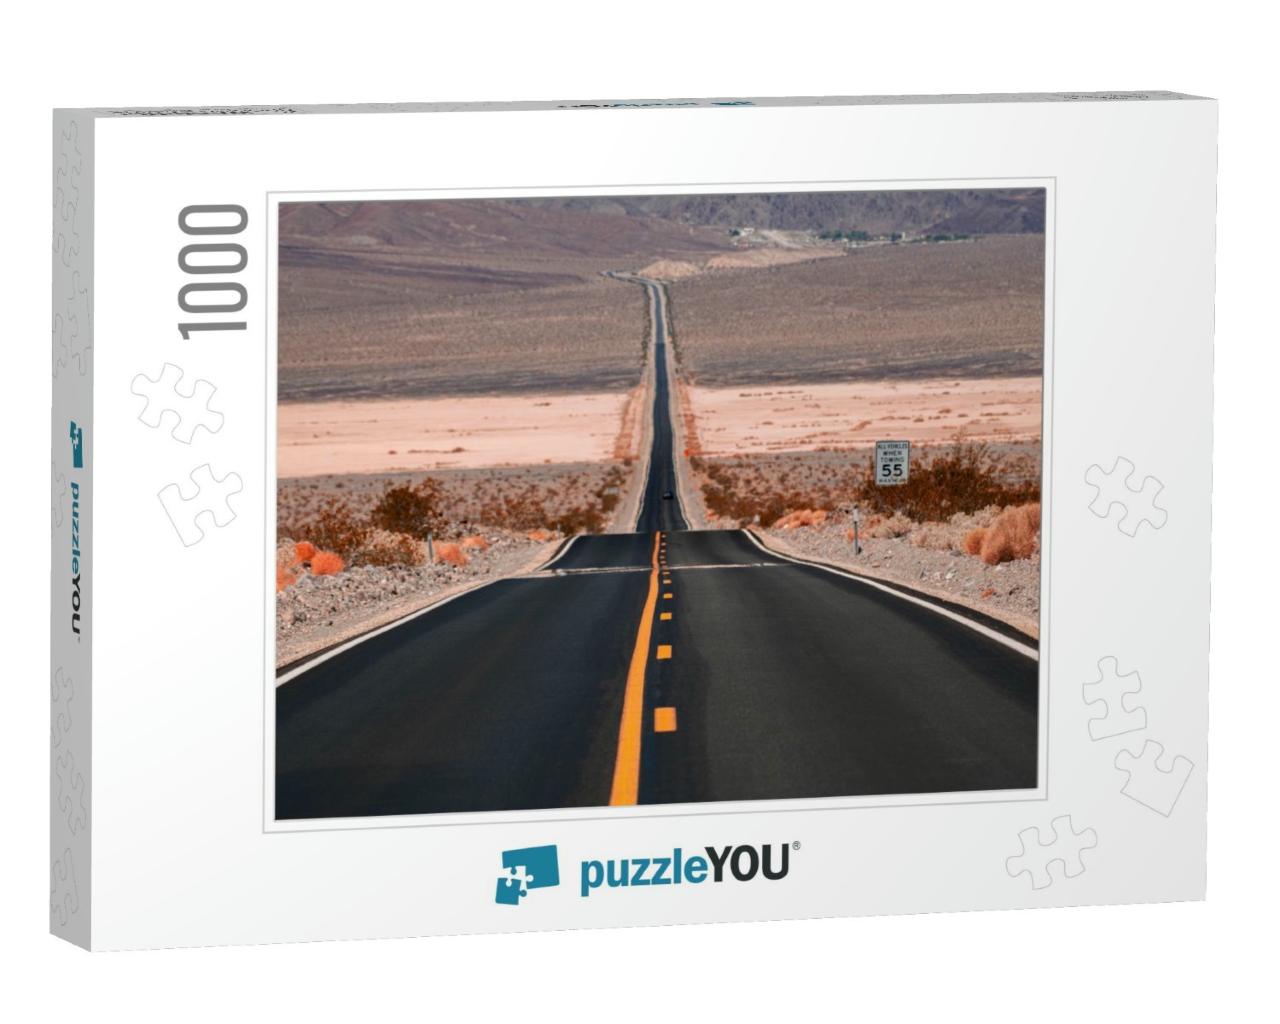 Empty Road in Death Valley National Park California... Jigsaw Puzzle with 1000 pieces